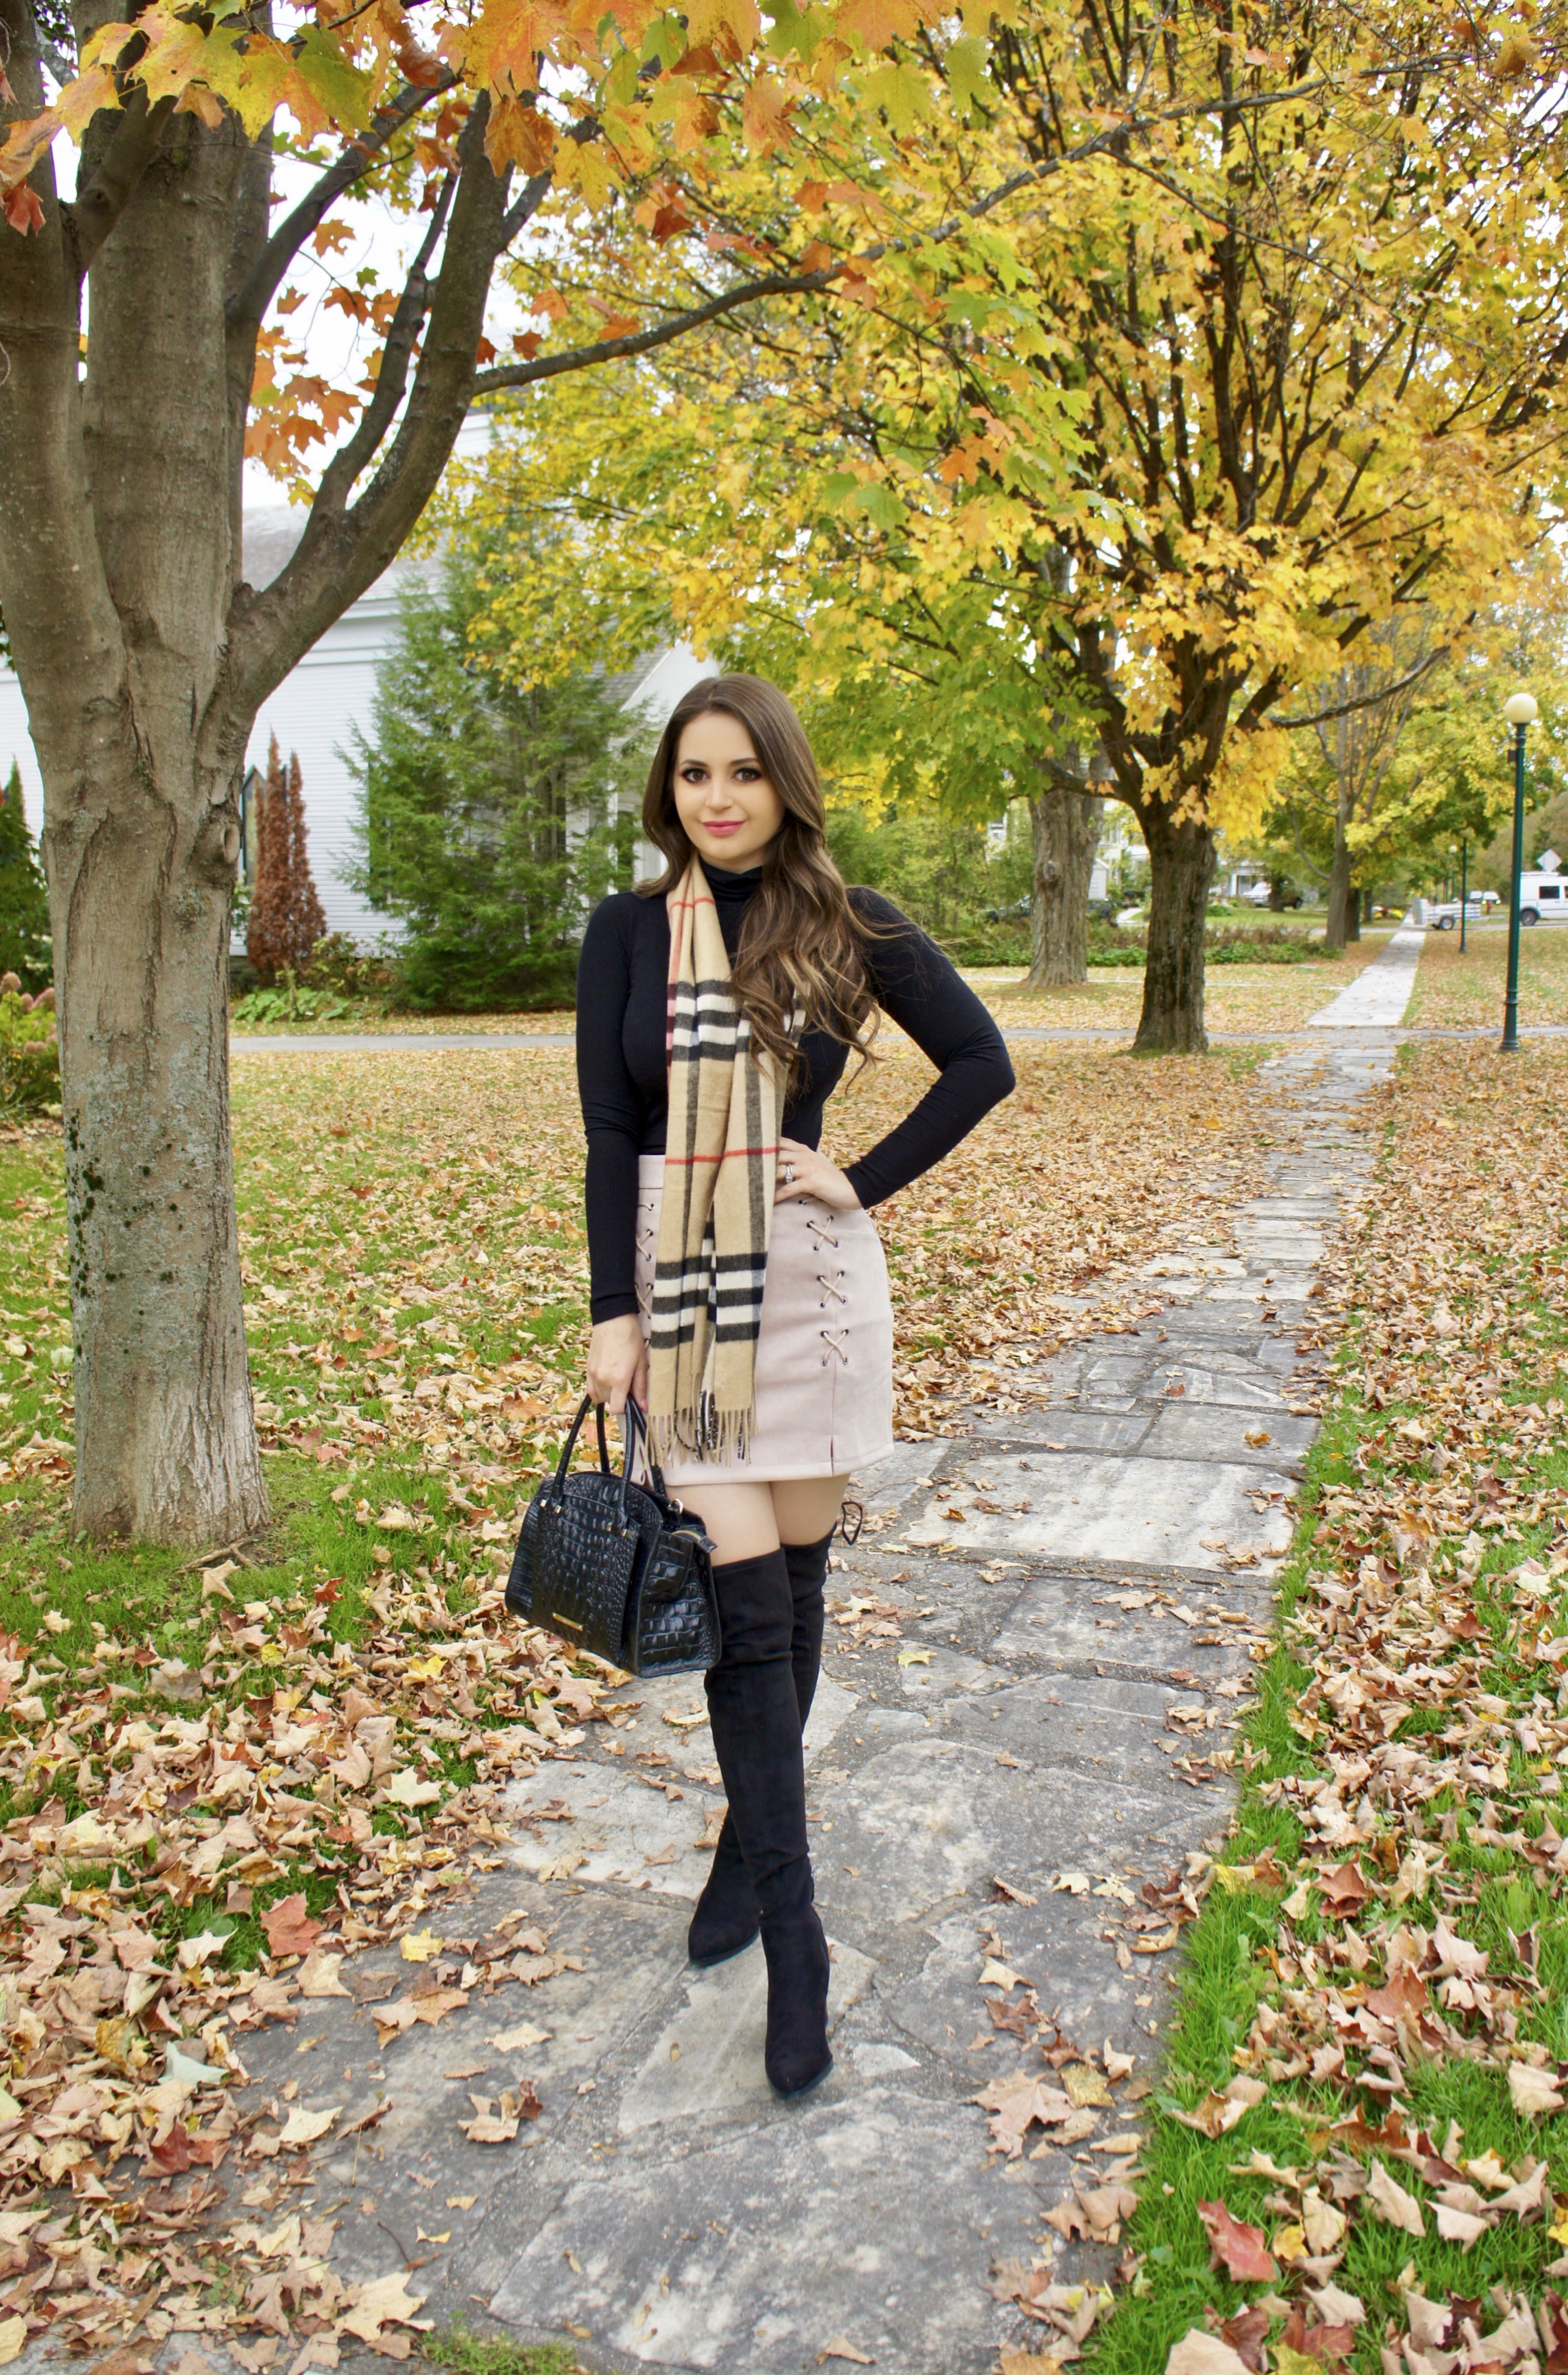 Perfect Suede Skirt For Fall - Life of Style Blog